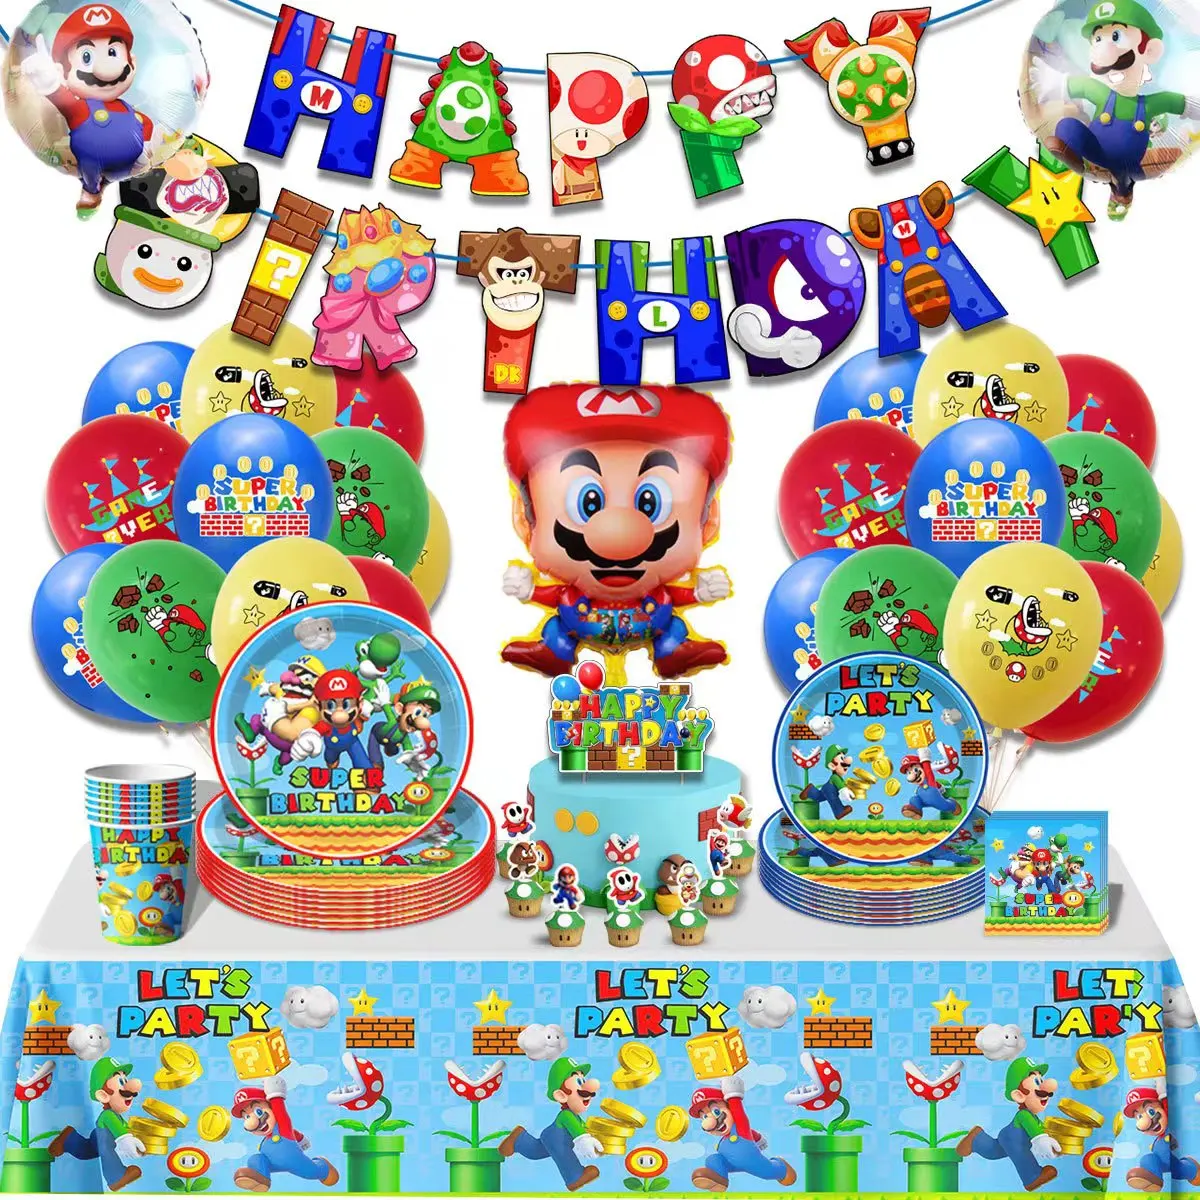 Super Mario Bros Birthday Party Decoration Game Mario Brother Theme Tableware Cup Plate Balloon Party Supplies Kids Backdrop